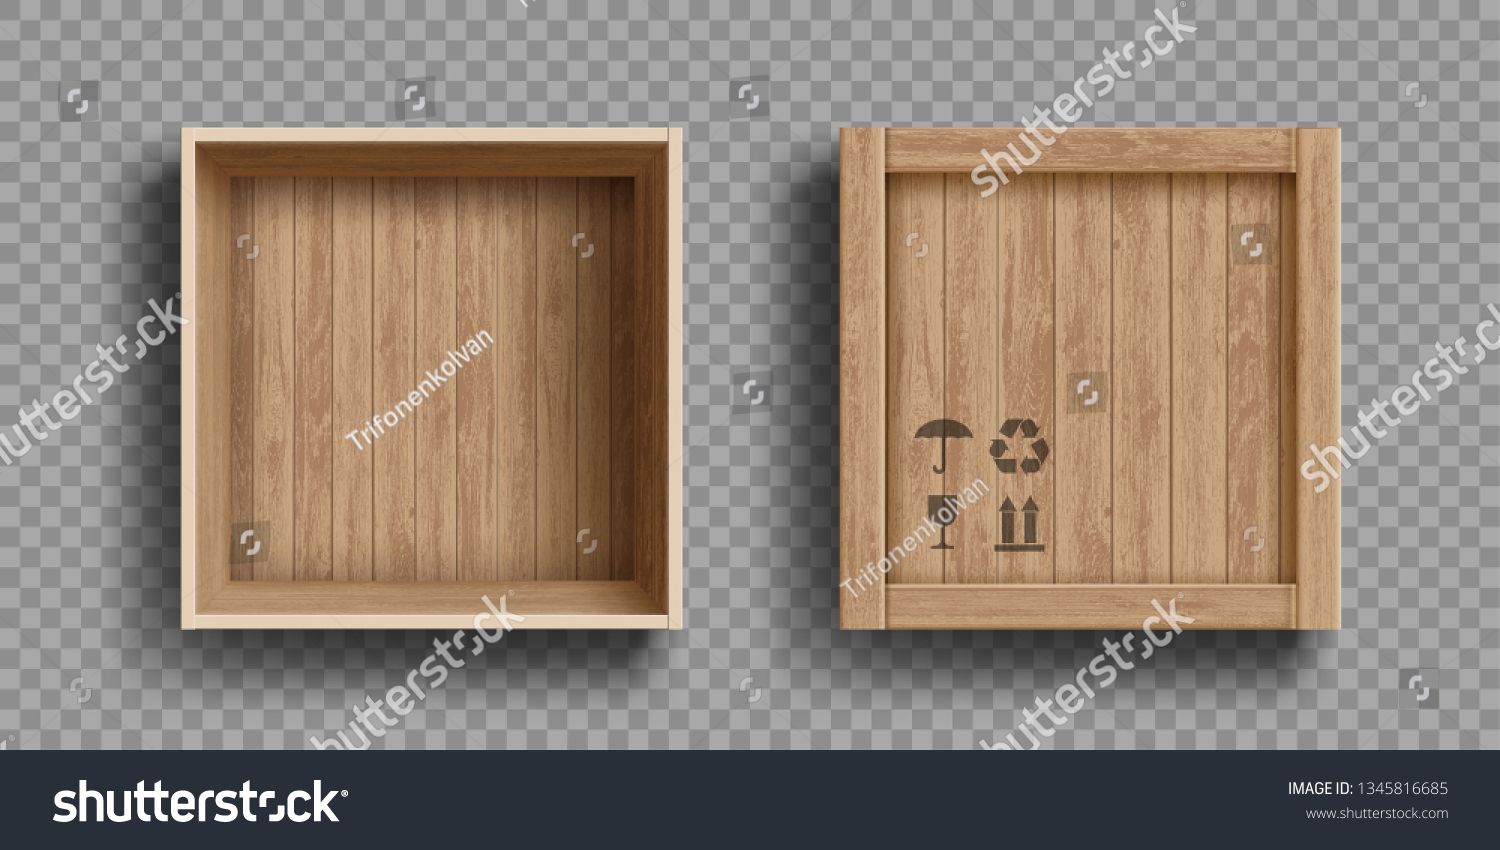 Empty open and closed wooden box. Isolated on a transparent background. Vector illustration.